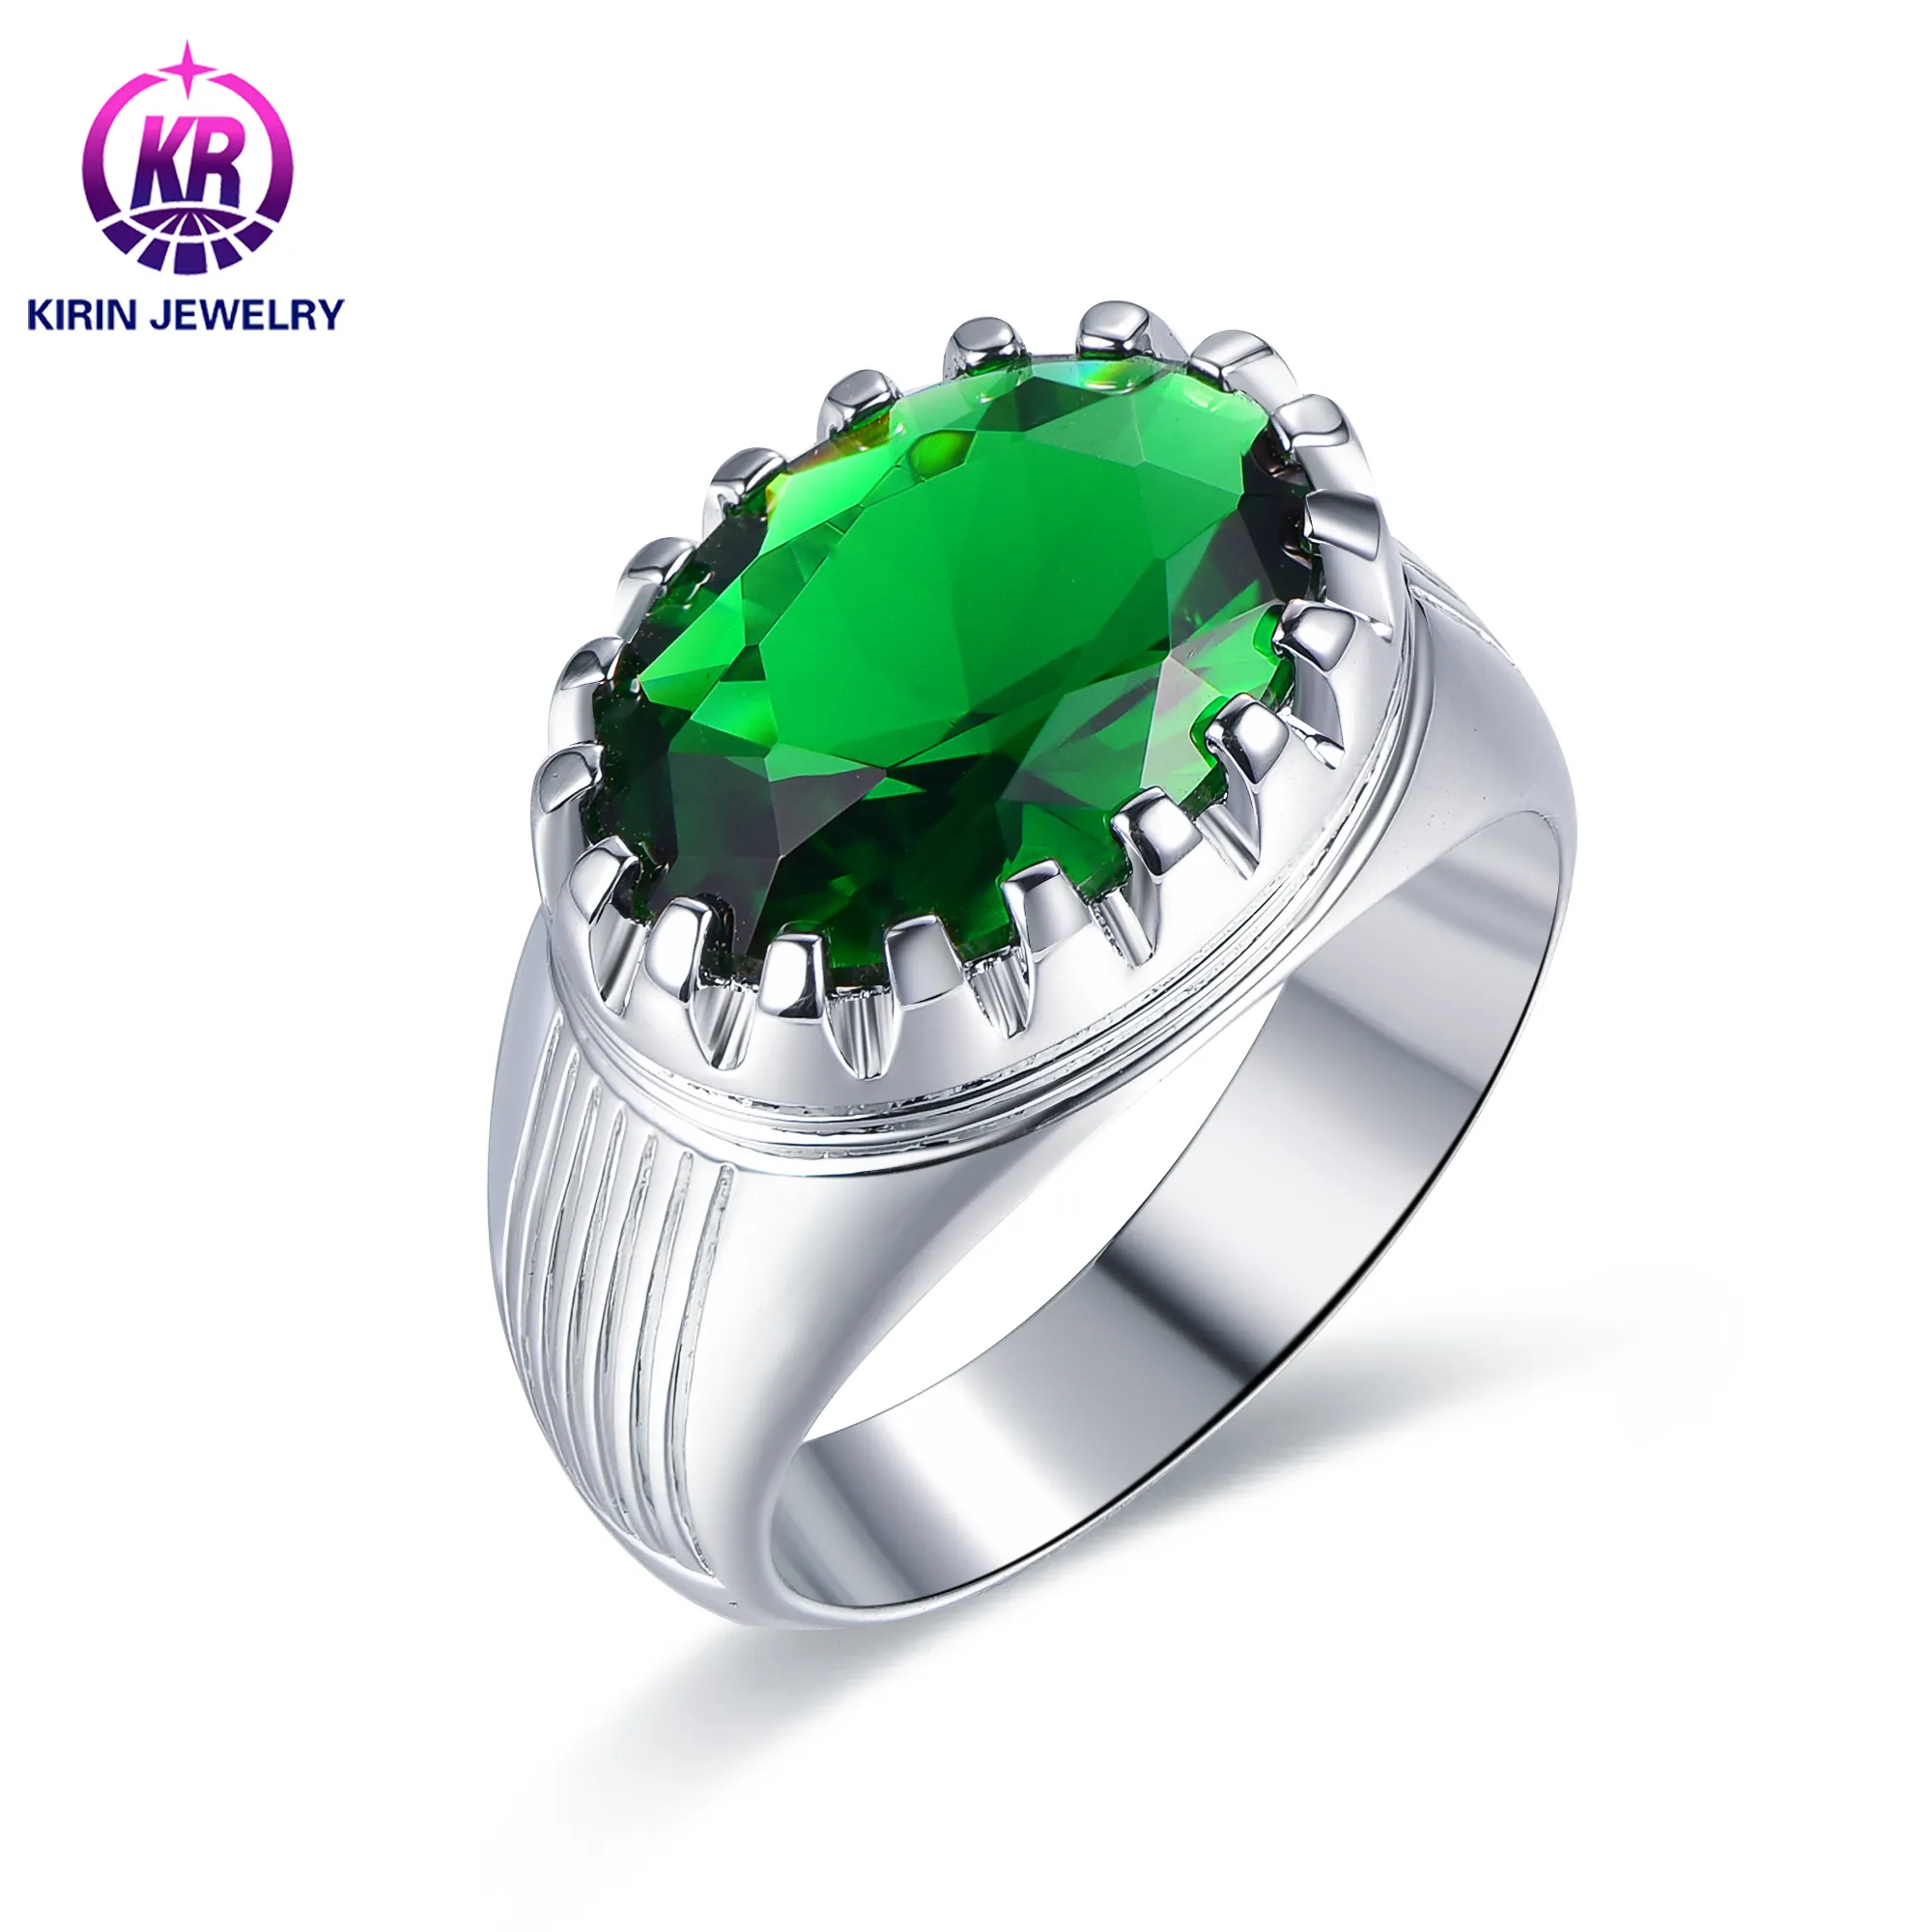 Wholesale men's rings jade rings 925 jewelry agate natural matching green fashionable zircon 925 sterling silver jewelry